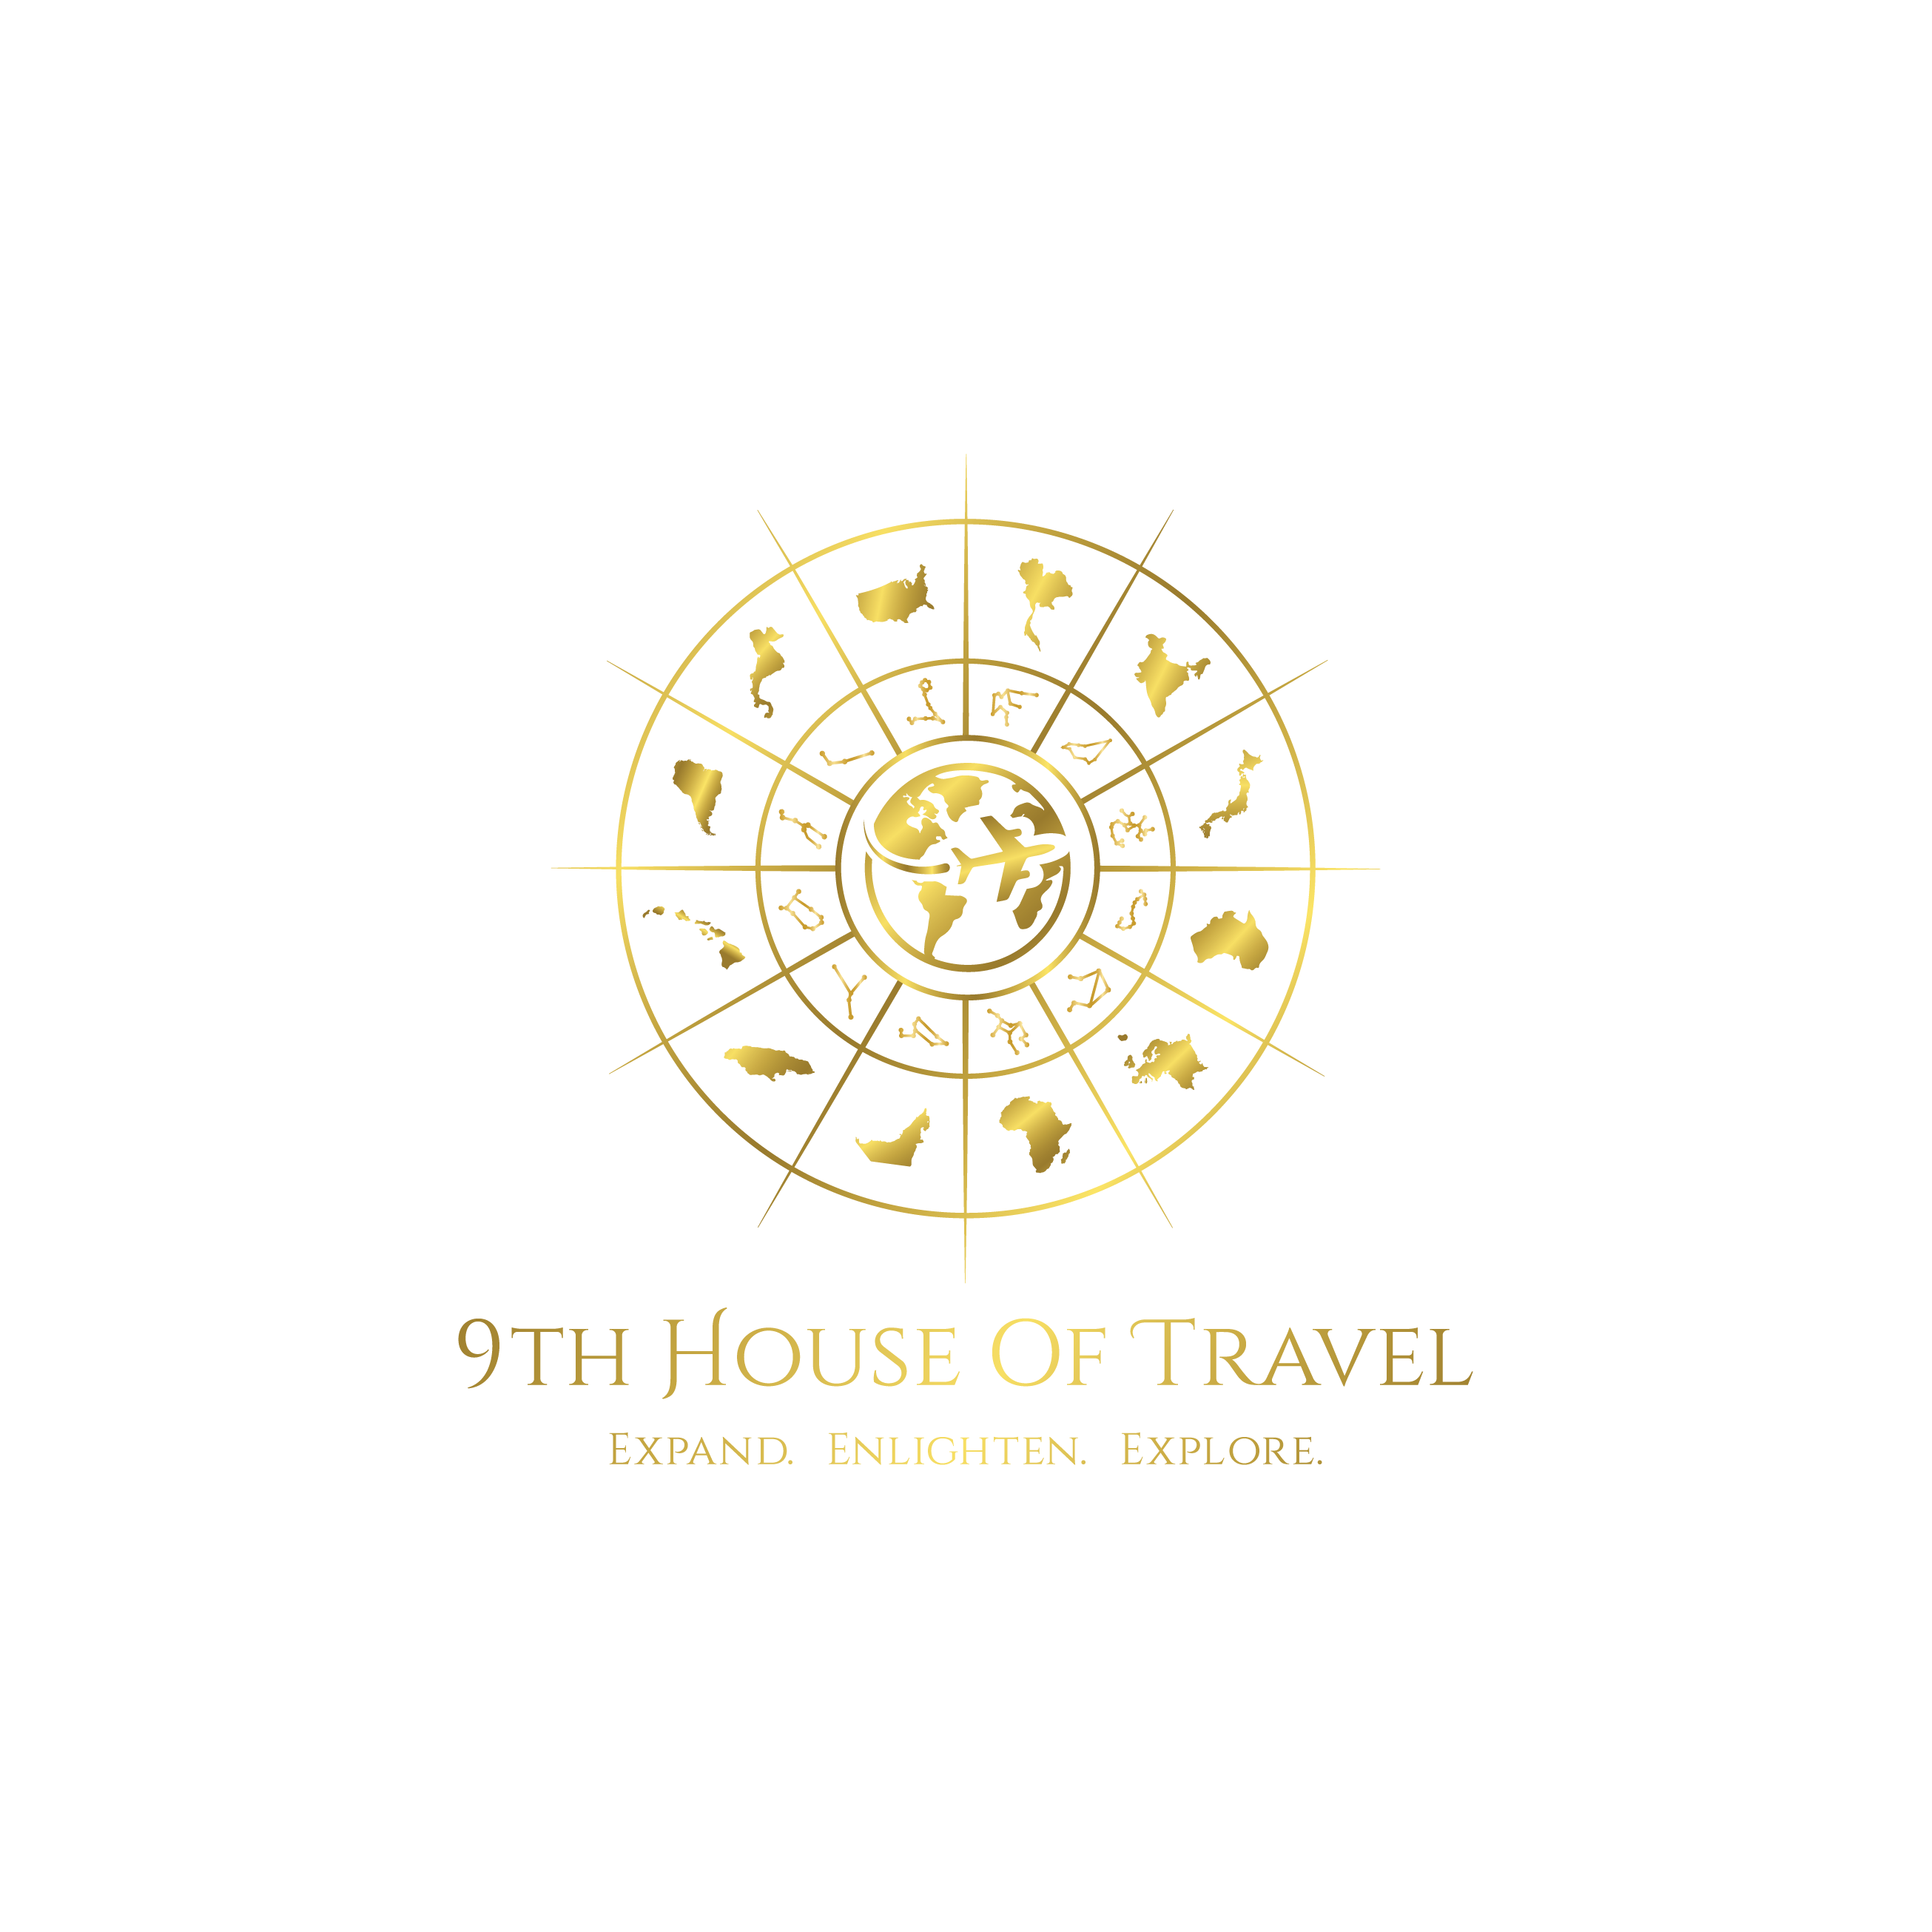 9th house of travel